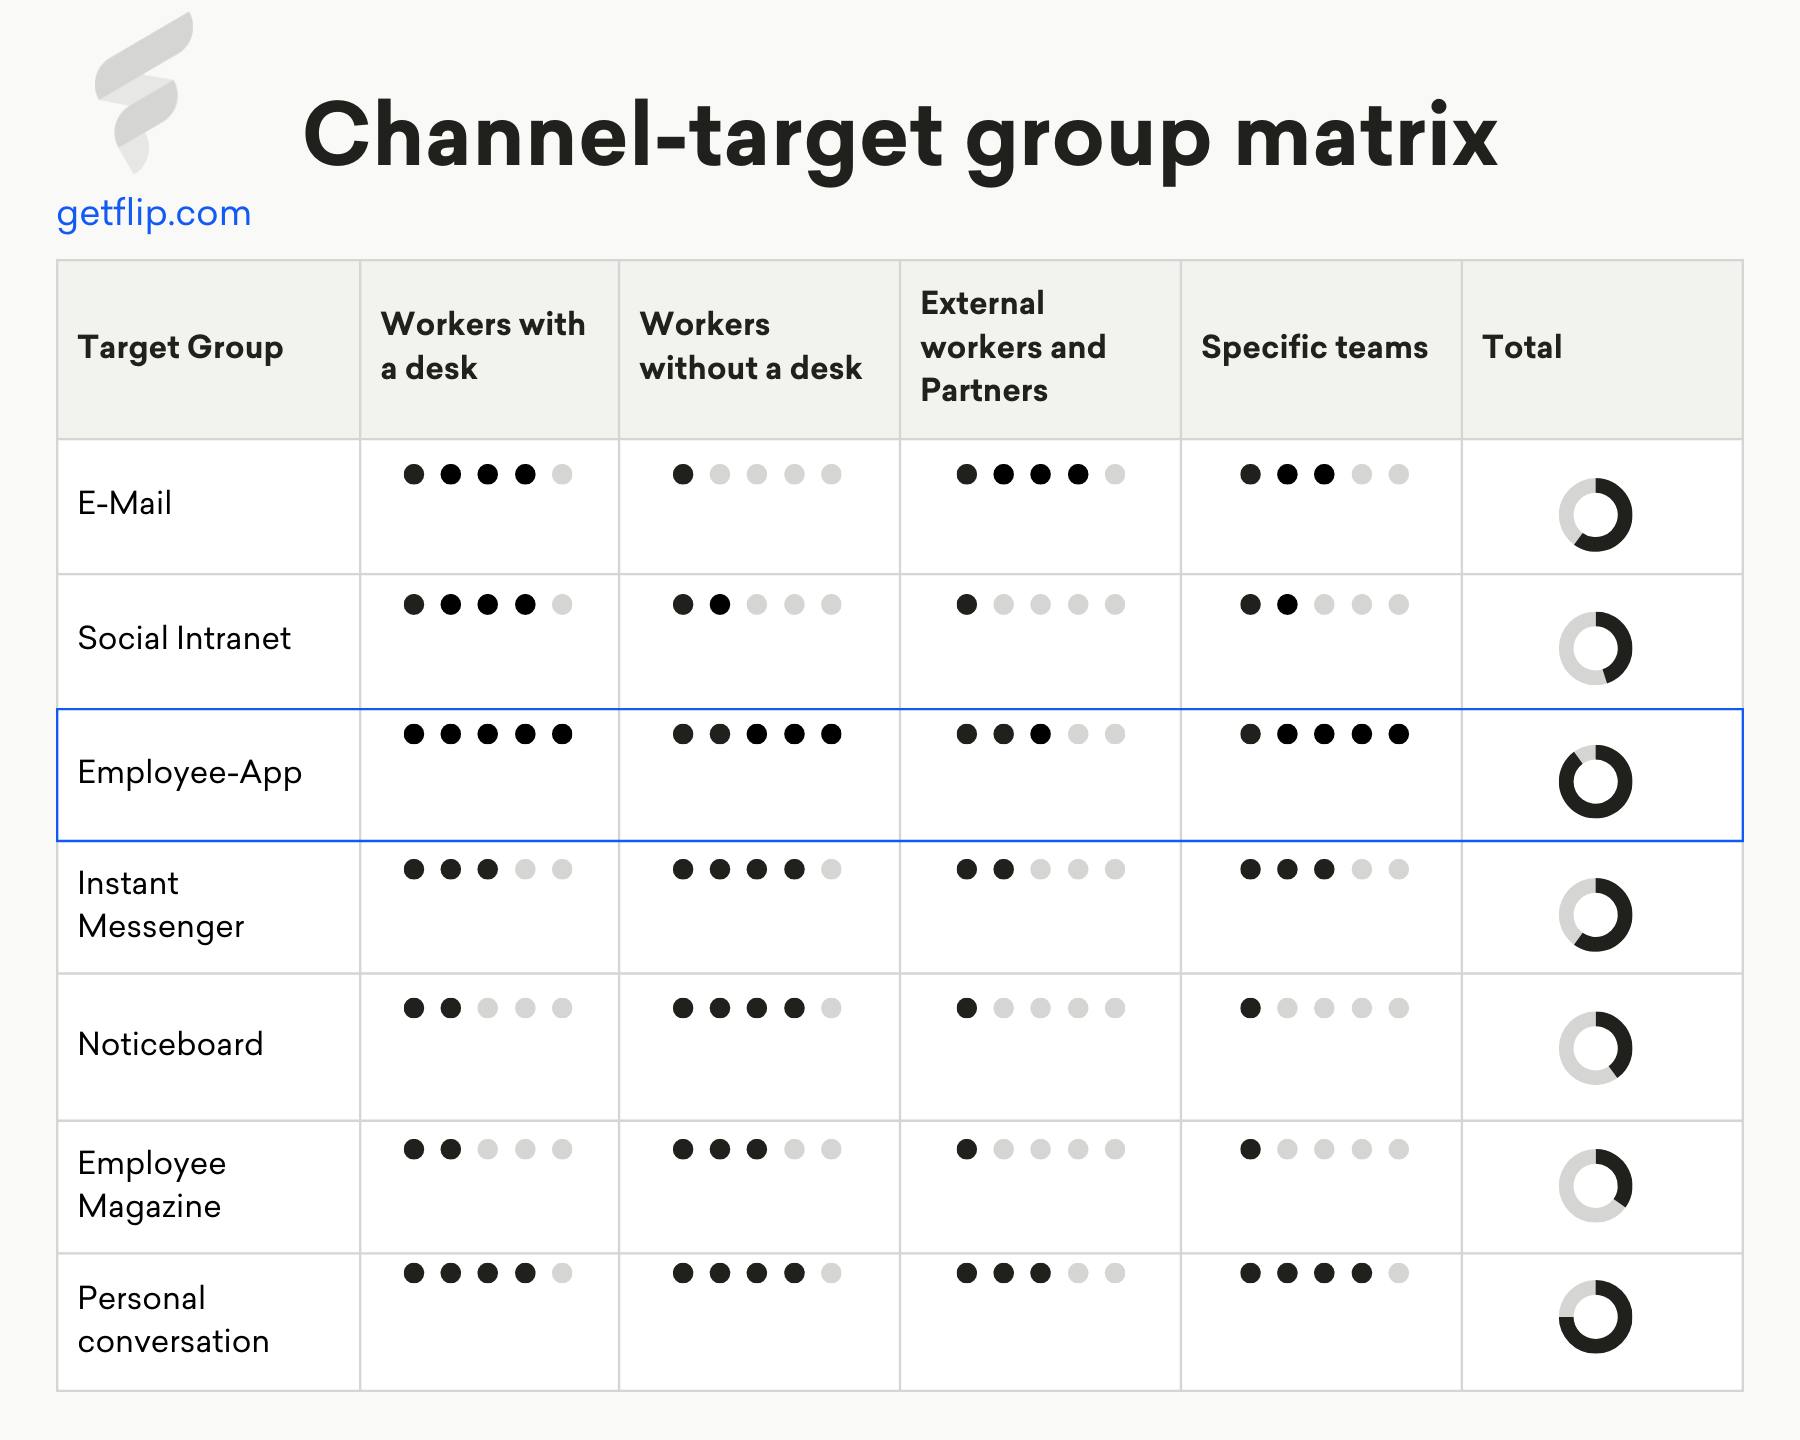 Overview showing which internal communication channel is best suited for which target group. The personal conversation and the employee app perform best overall.